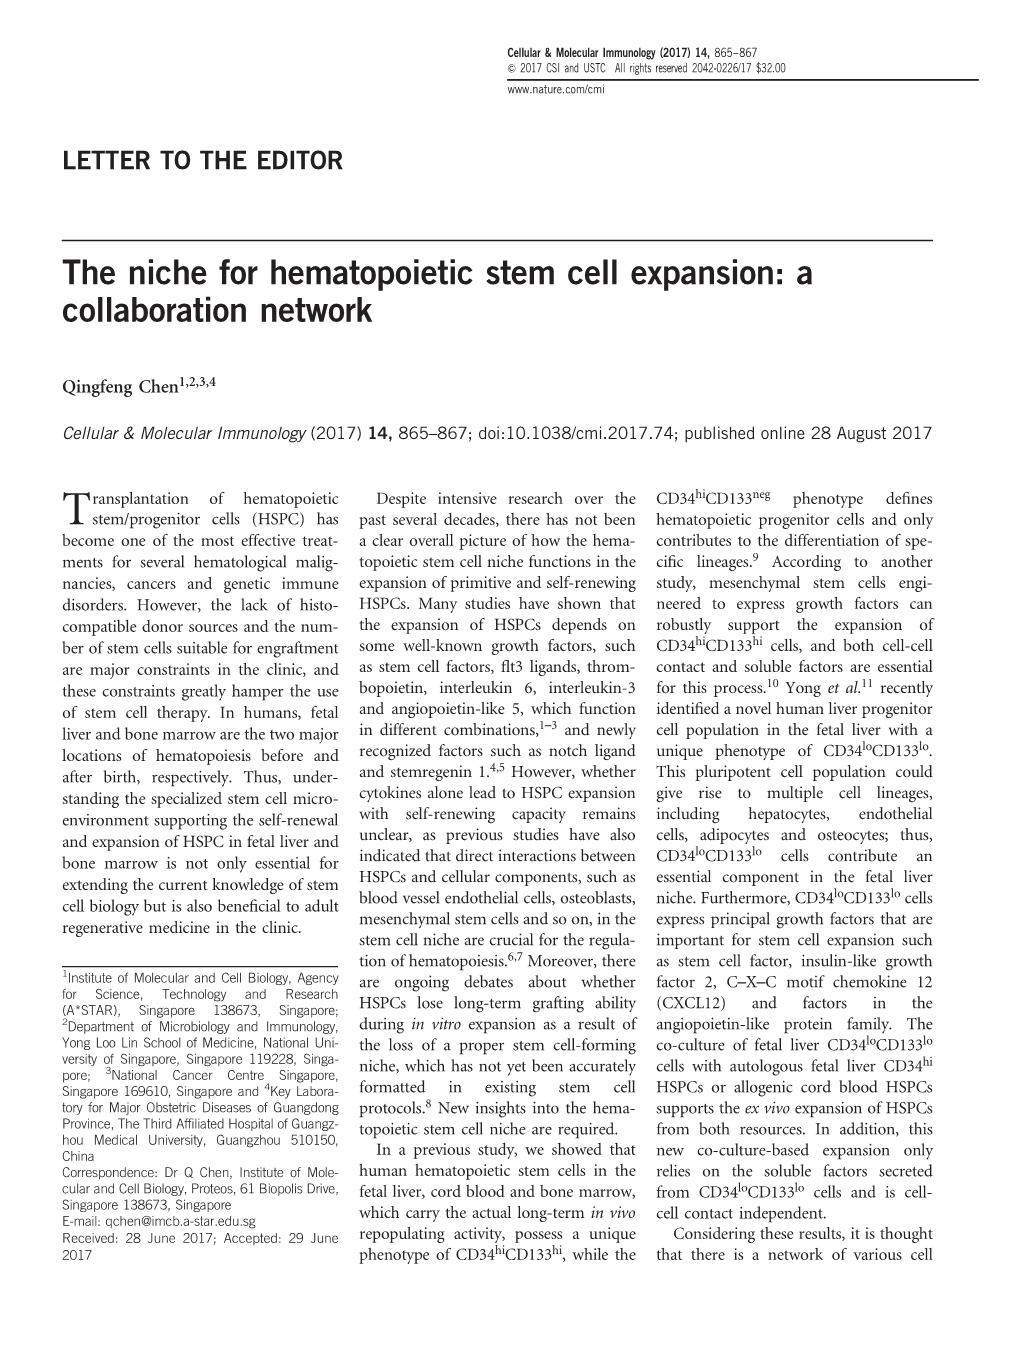 The Niche for Hematopoietic Stem Cell Expansion: a Collaboration Network